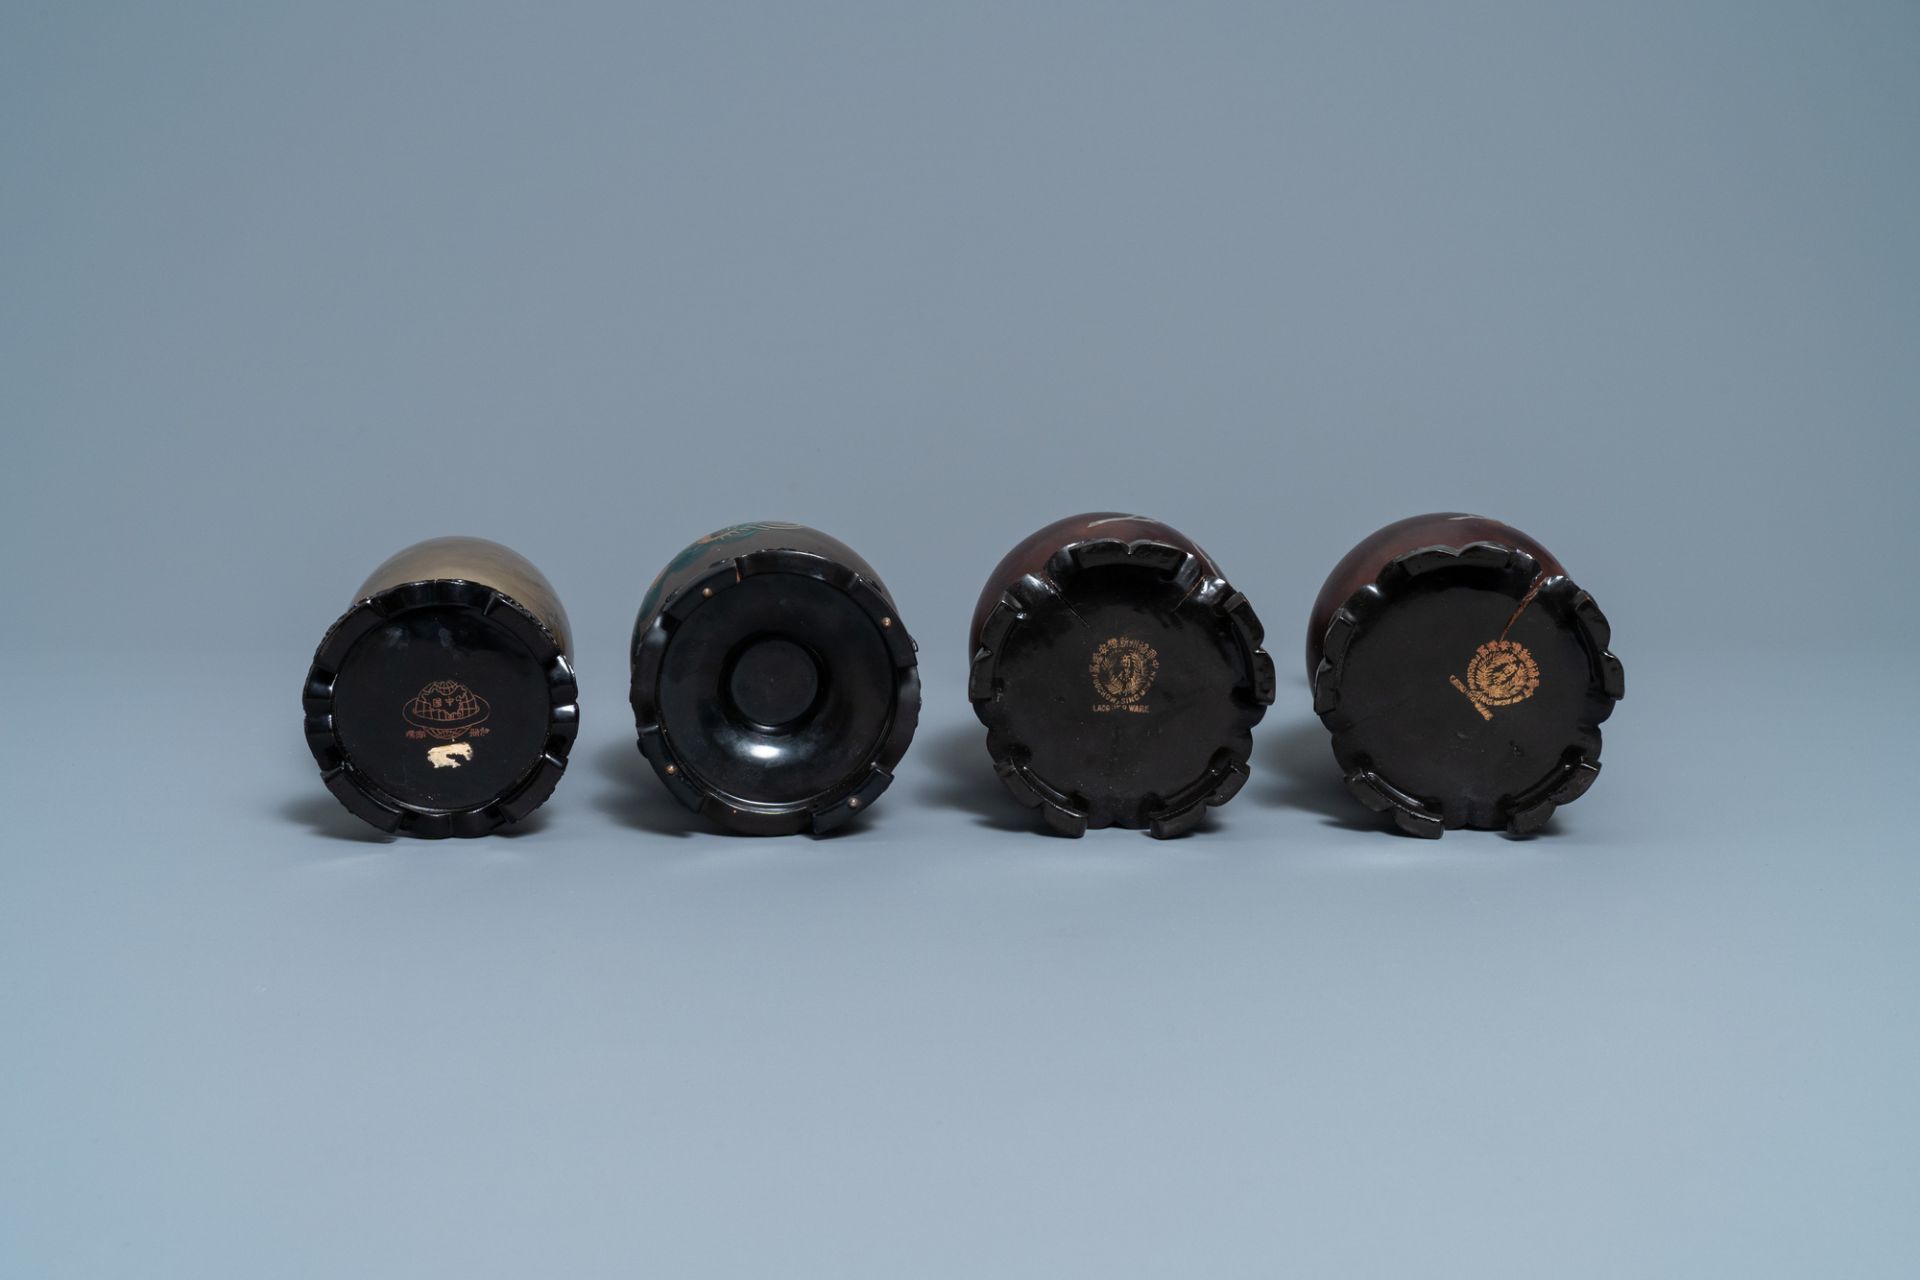 Four Chinese Shen Shao'an type Foochow lacquerware vases, Republic - Image 7 of 7